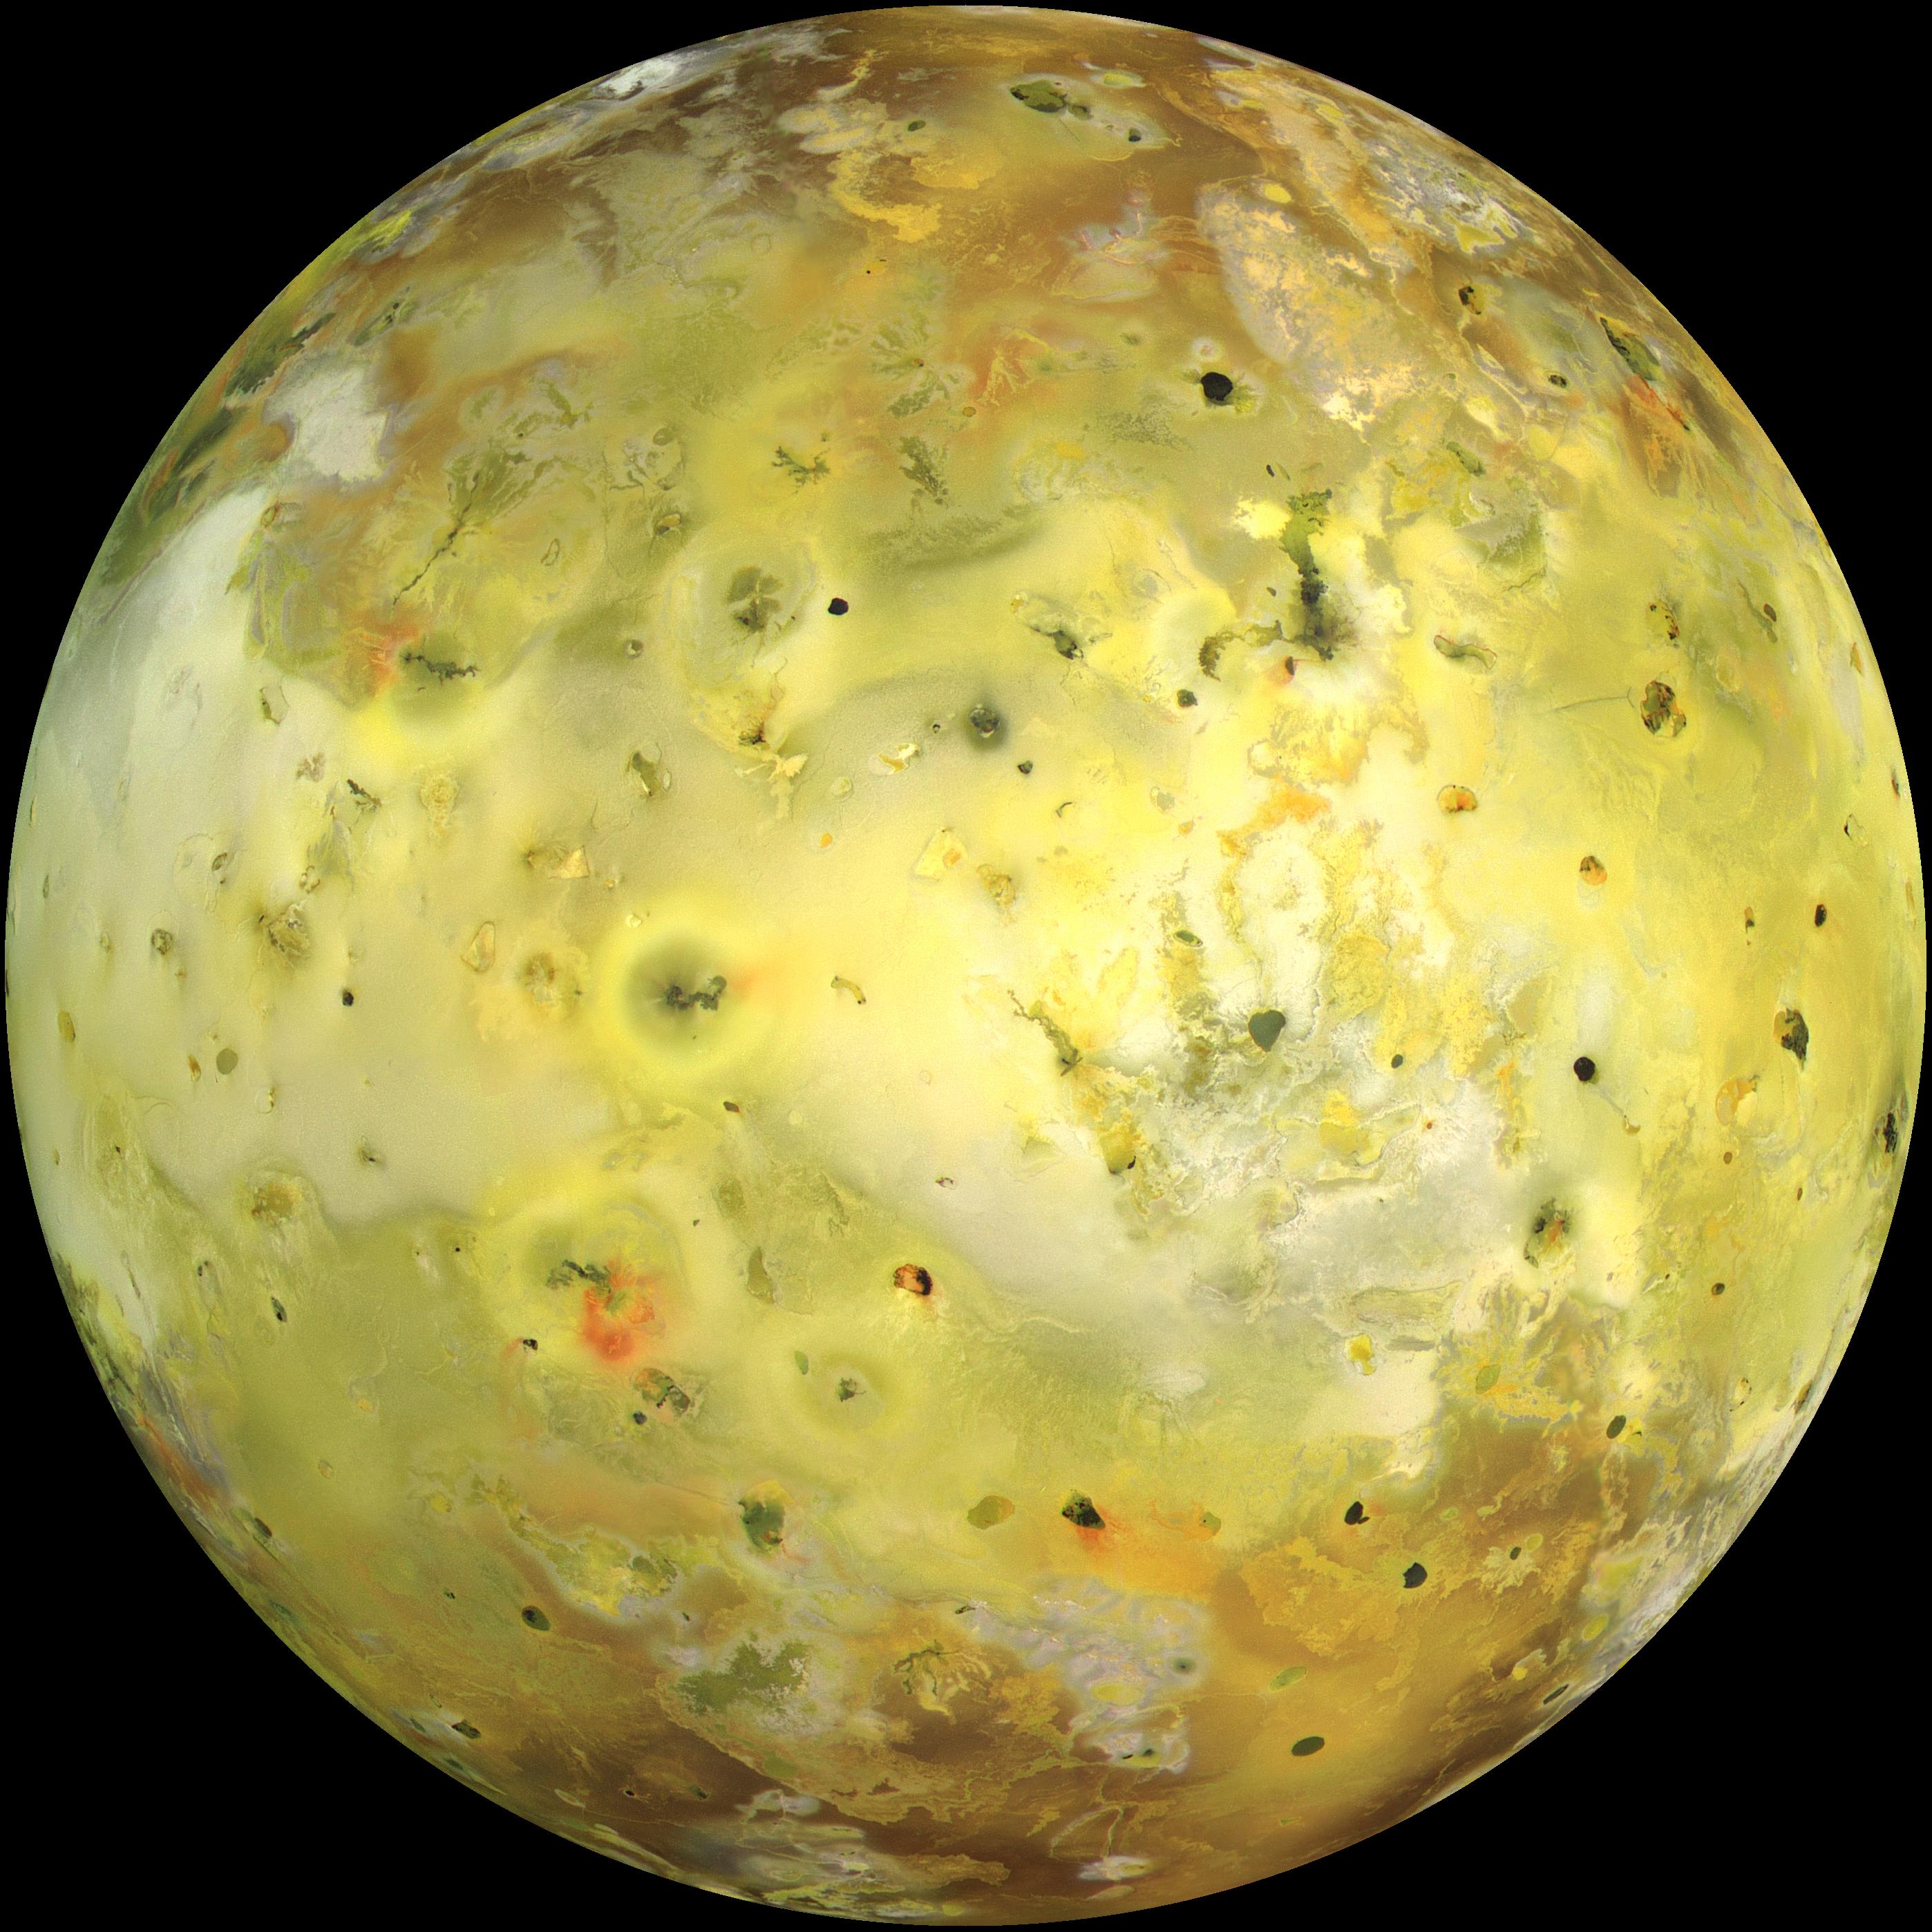 An image of a planet with yellow spots on it.